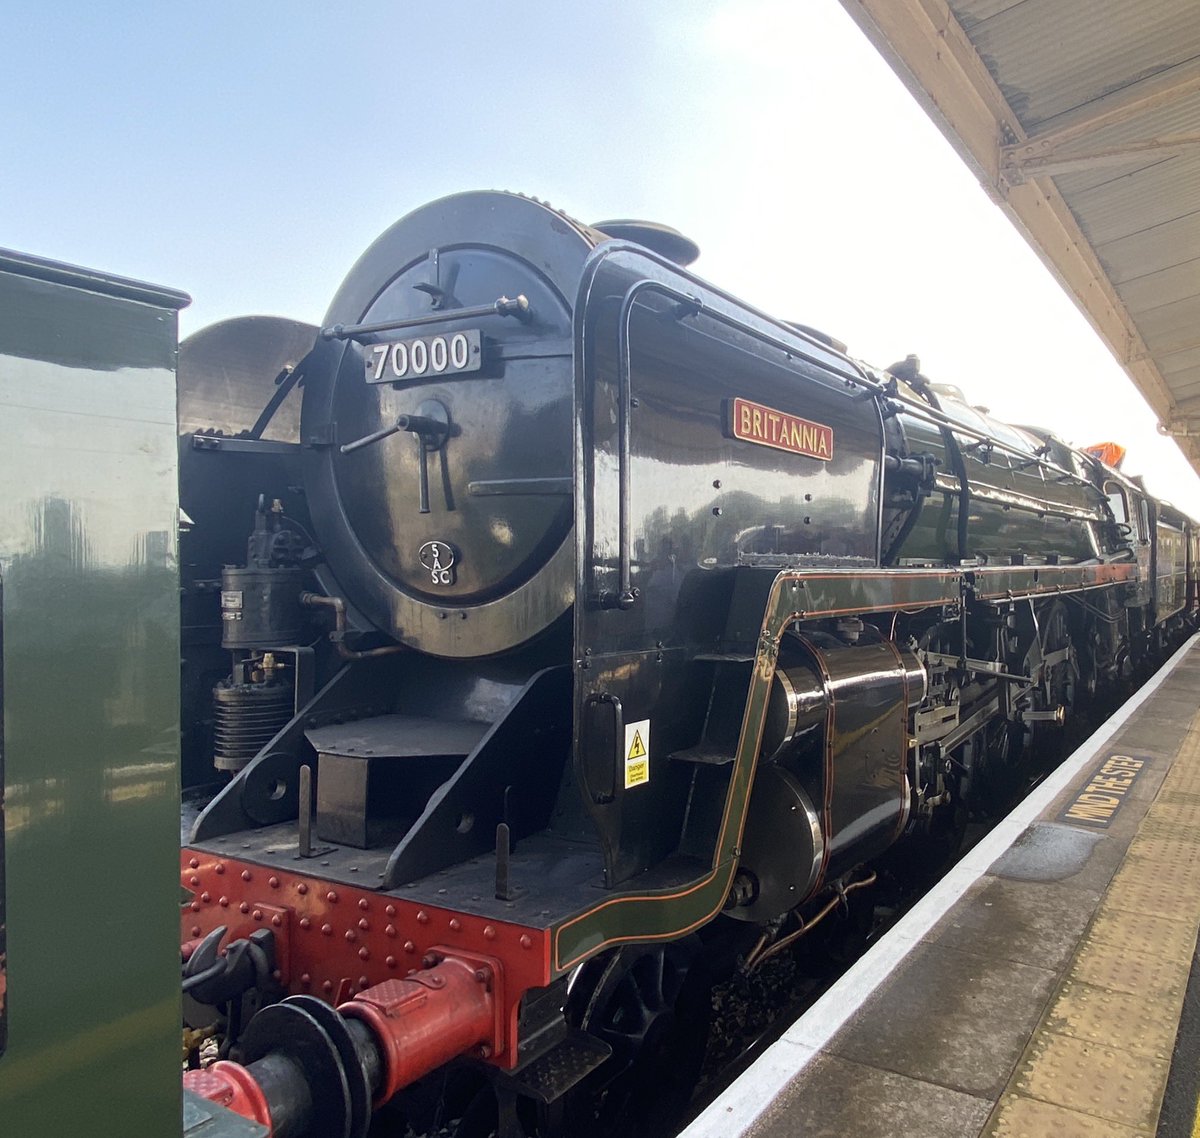 Here’s 46100 and 70000 taking on water at Taunton. A nice - if hot! - run so far with a max of 73 on the levels (hit 71 prior to slowing for Oldfield Park, so failed the 75 challenge) but the best bit of the day - Whiteball and the banks - are to come.